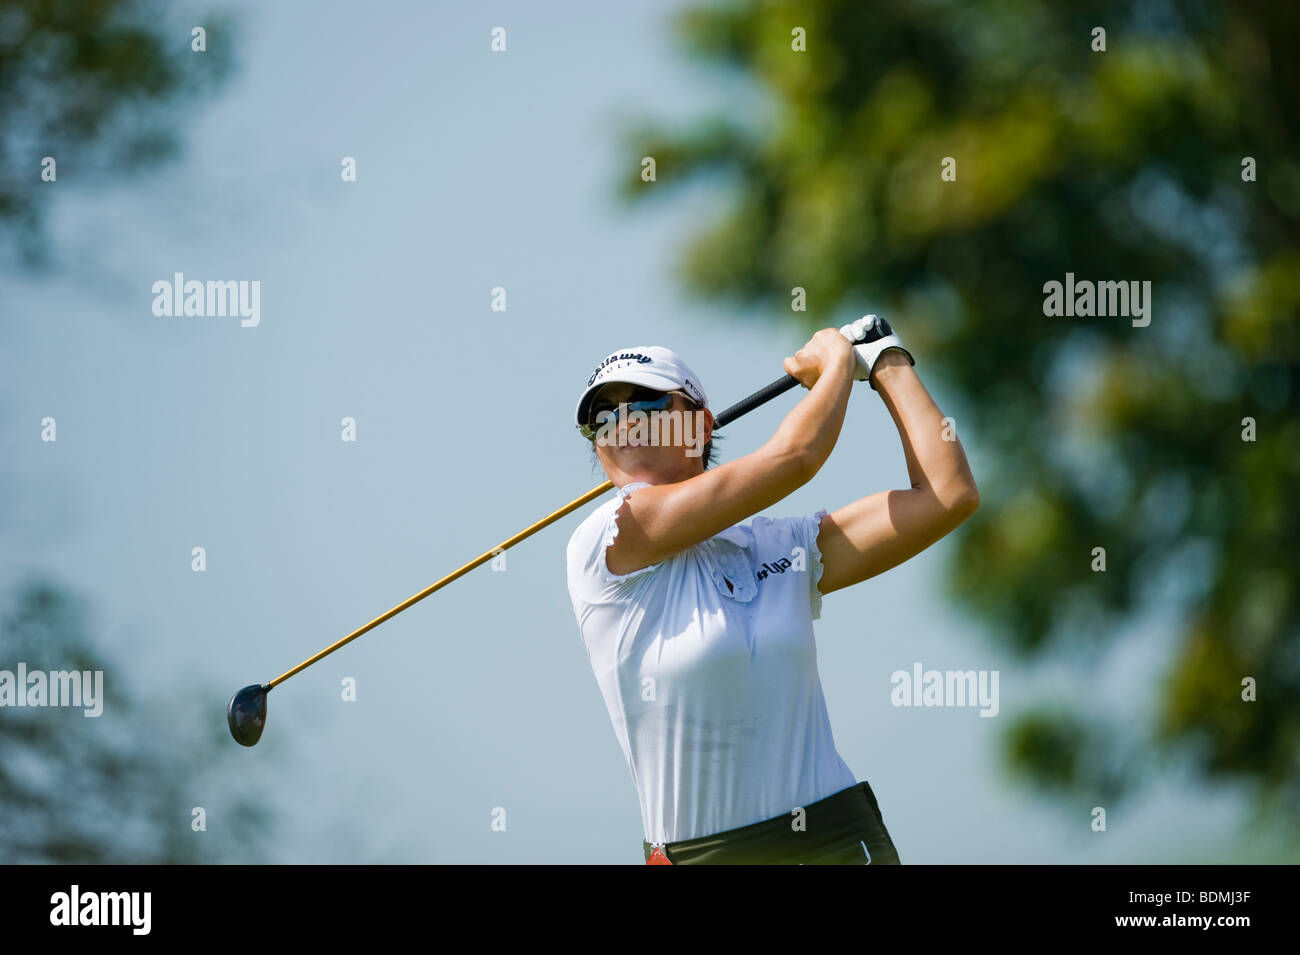 Louise Friberg of Sweden in action during the LGPA golf tournament HSBC Women's Champions at the Tanah Merah Country Club Singap Stock Photo